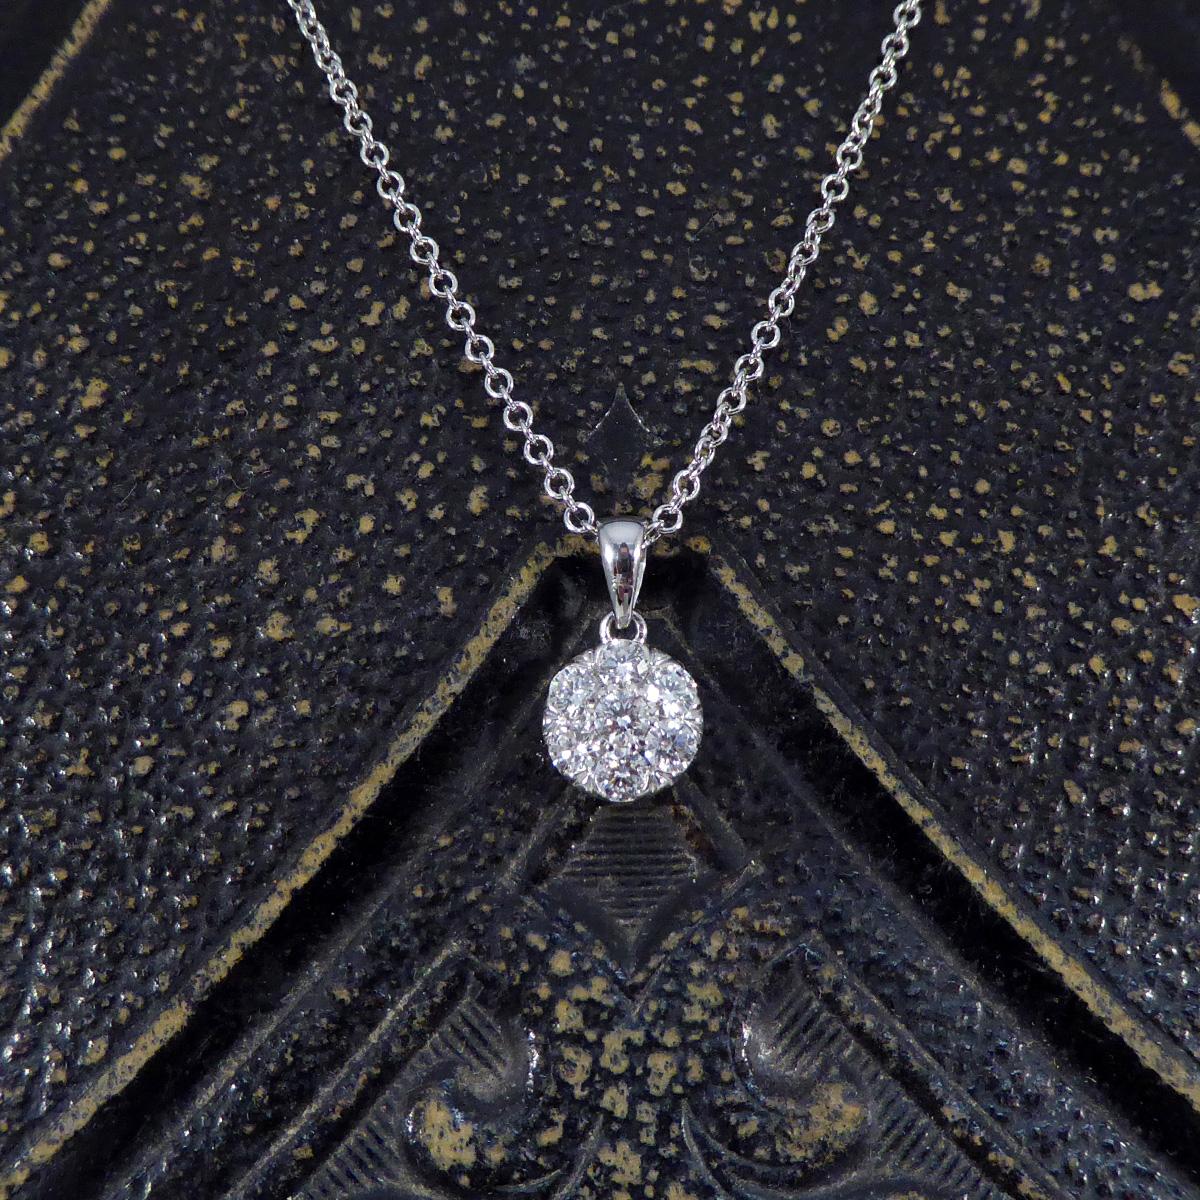 This stunning Diamond illusion cluster pendant necklace elegantly crafted in white gold, showcases a breathtaking design that gives the illusion of a single 2.00ct diamond. At its heart, the necklace features a carefully arranged cluster of diamonds